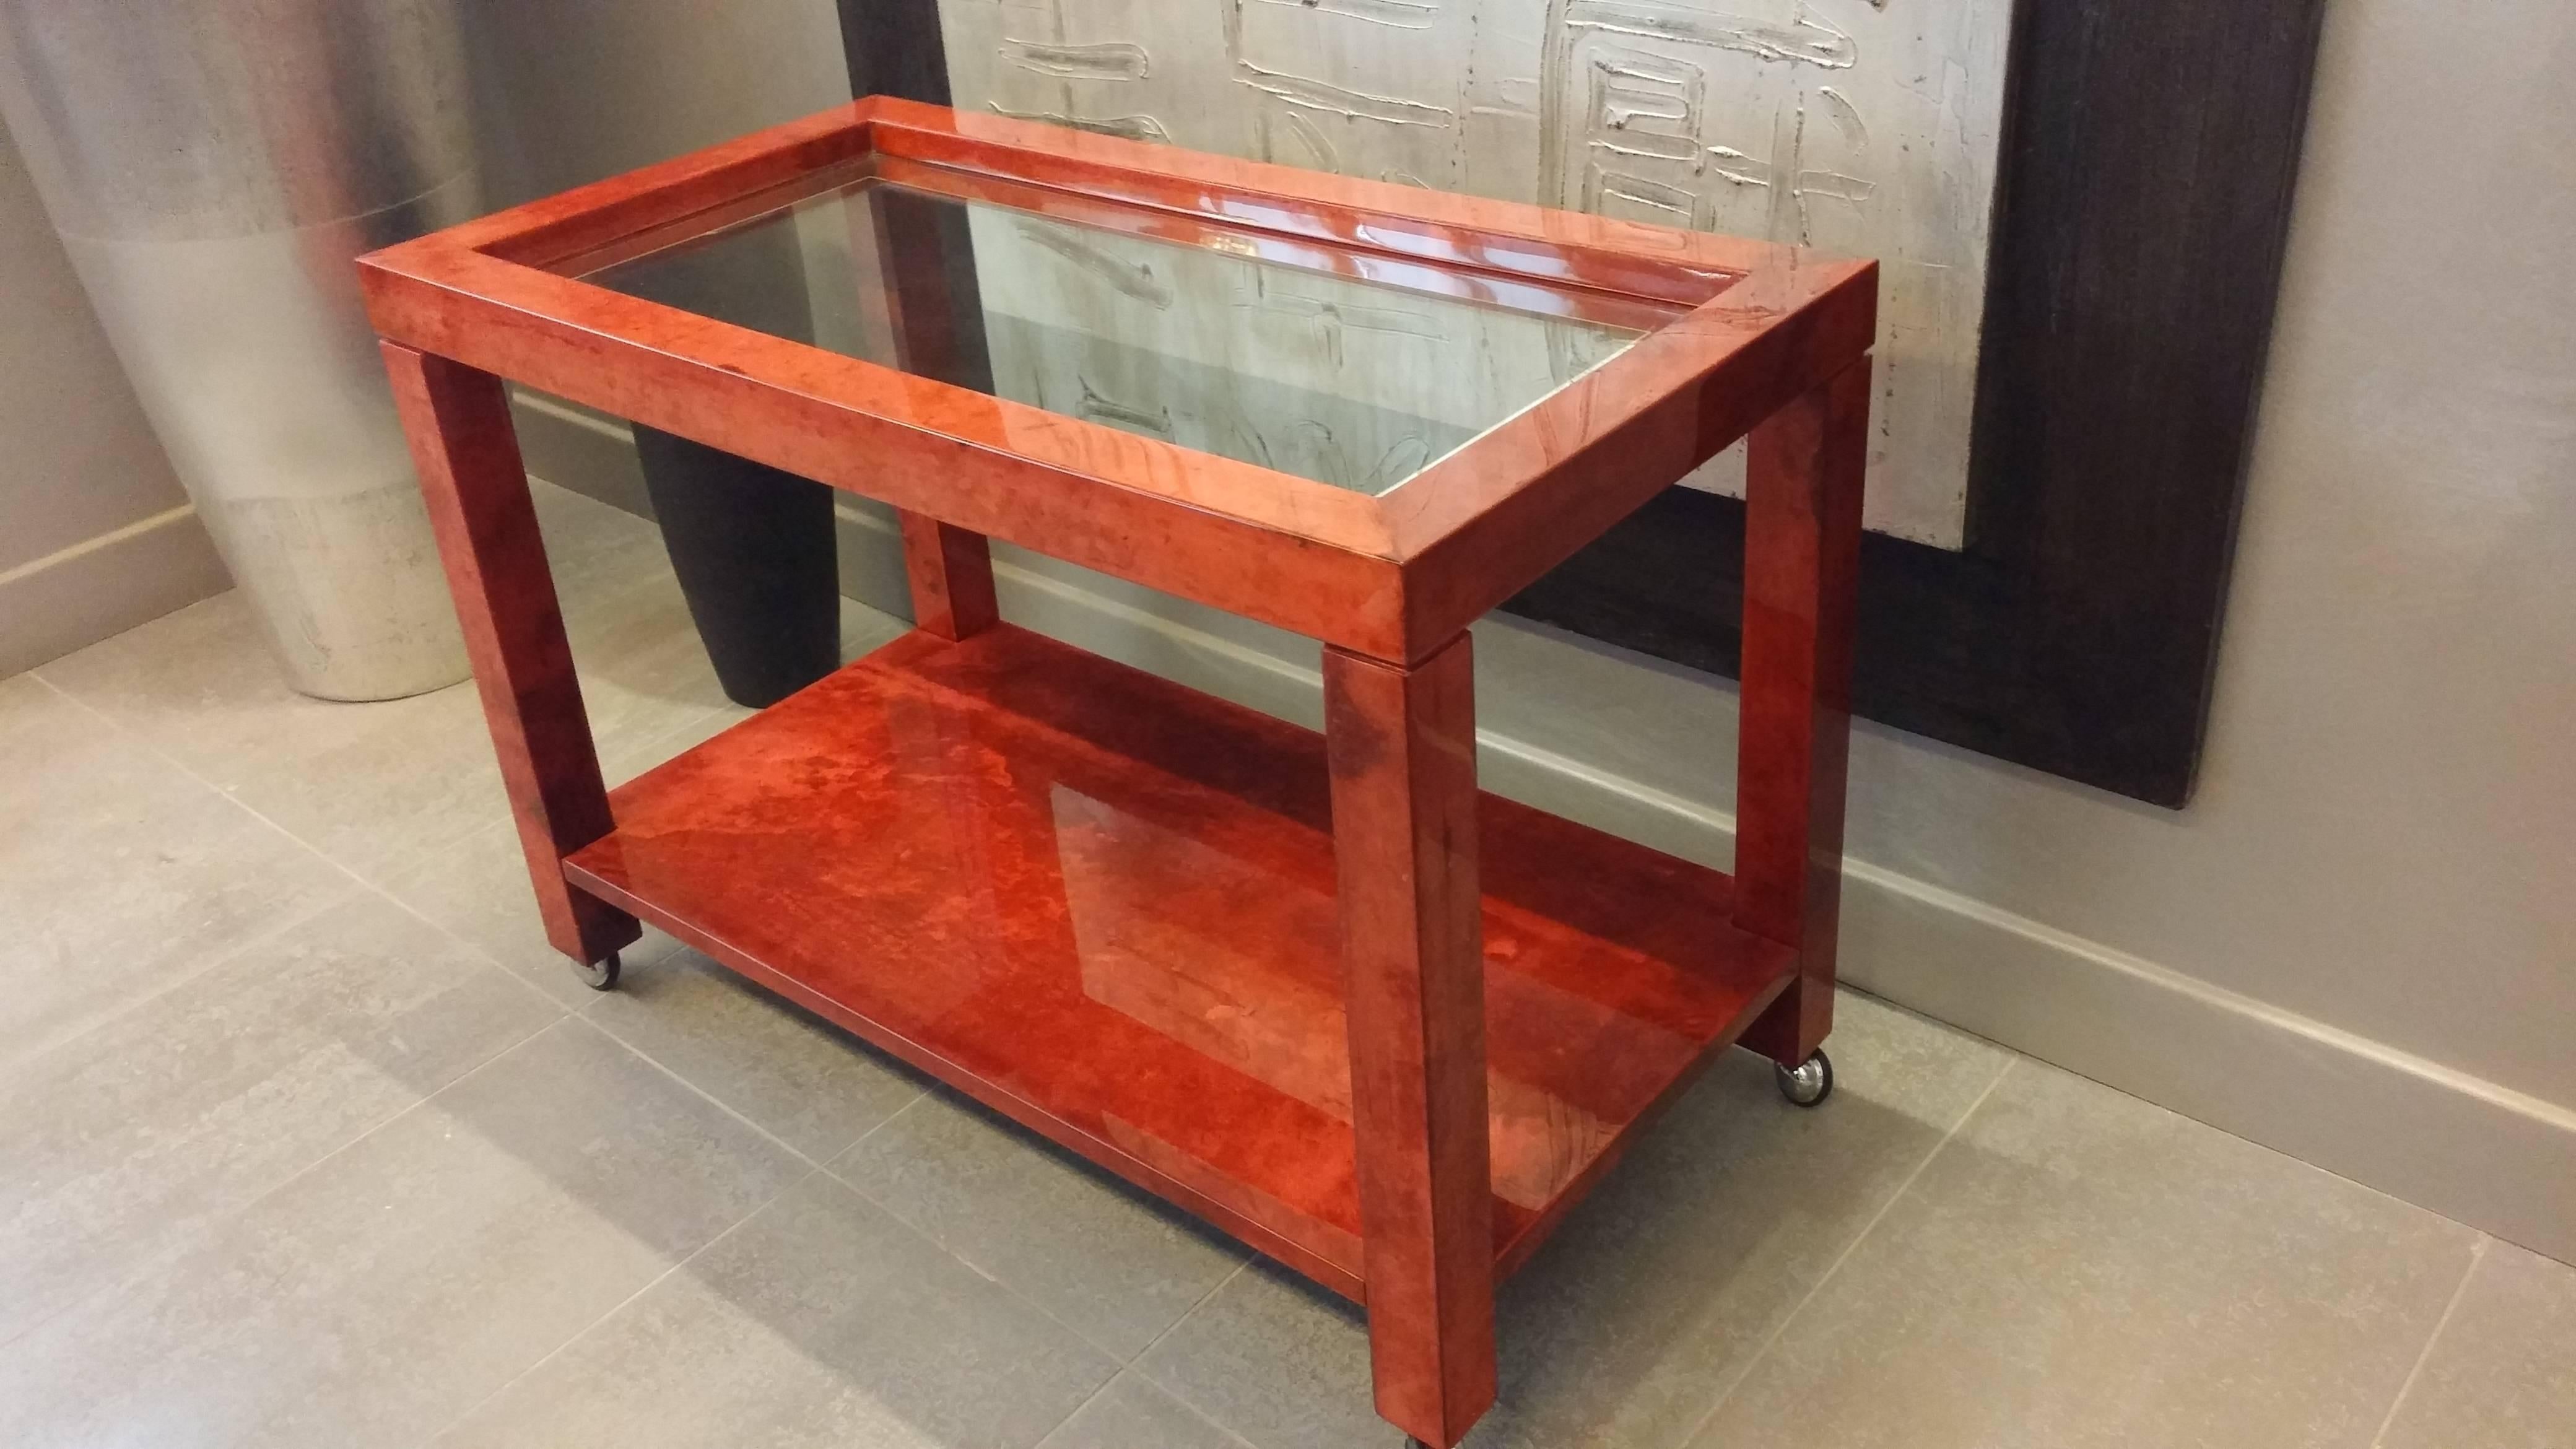 Red goatskin high gloss finish. With glass top. Very nice as a serving table cart or as a desk return.
Size 85 x 45 x H 60 cm.